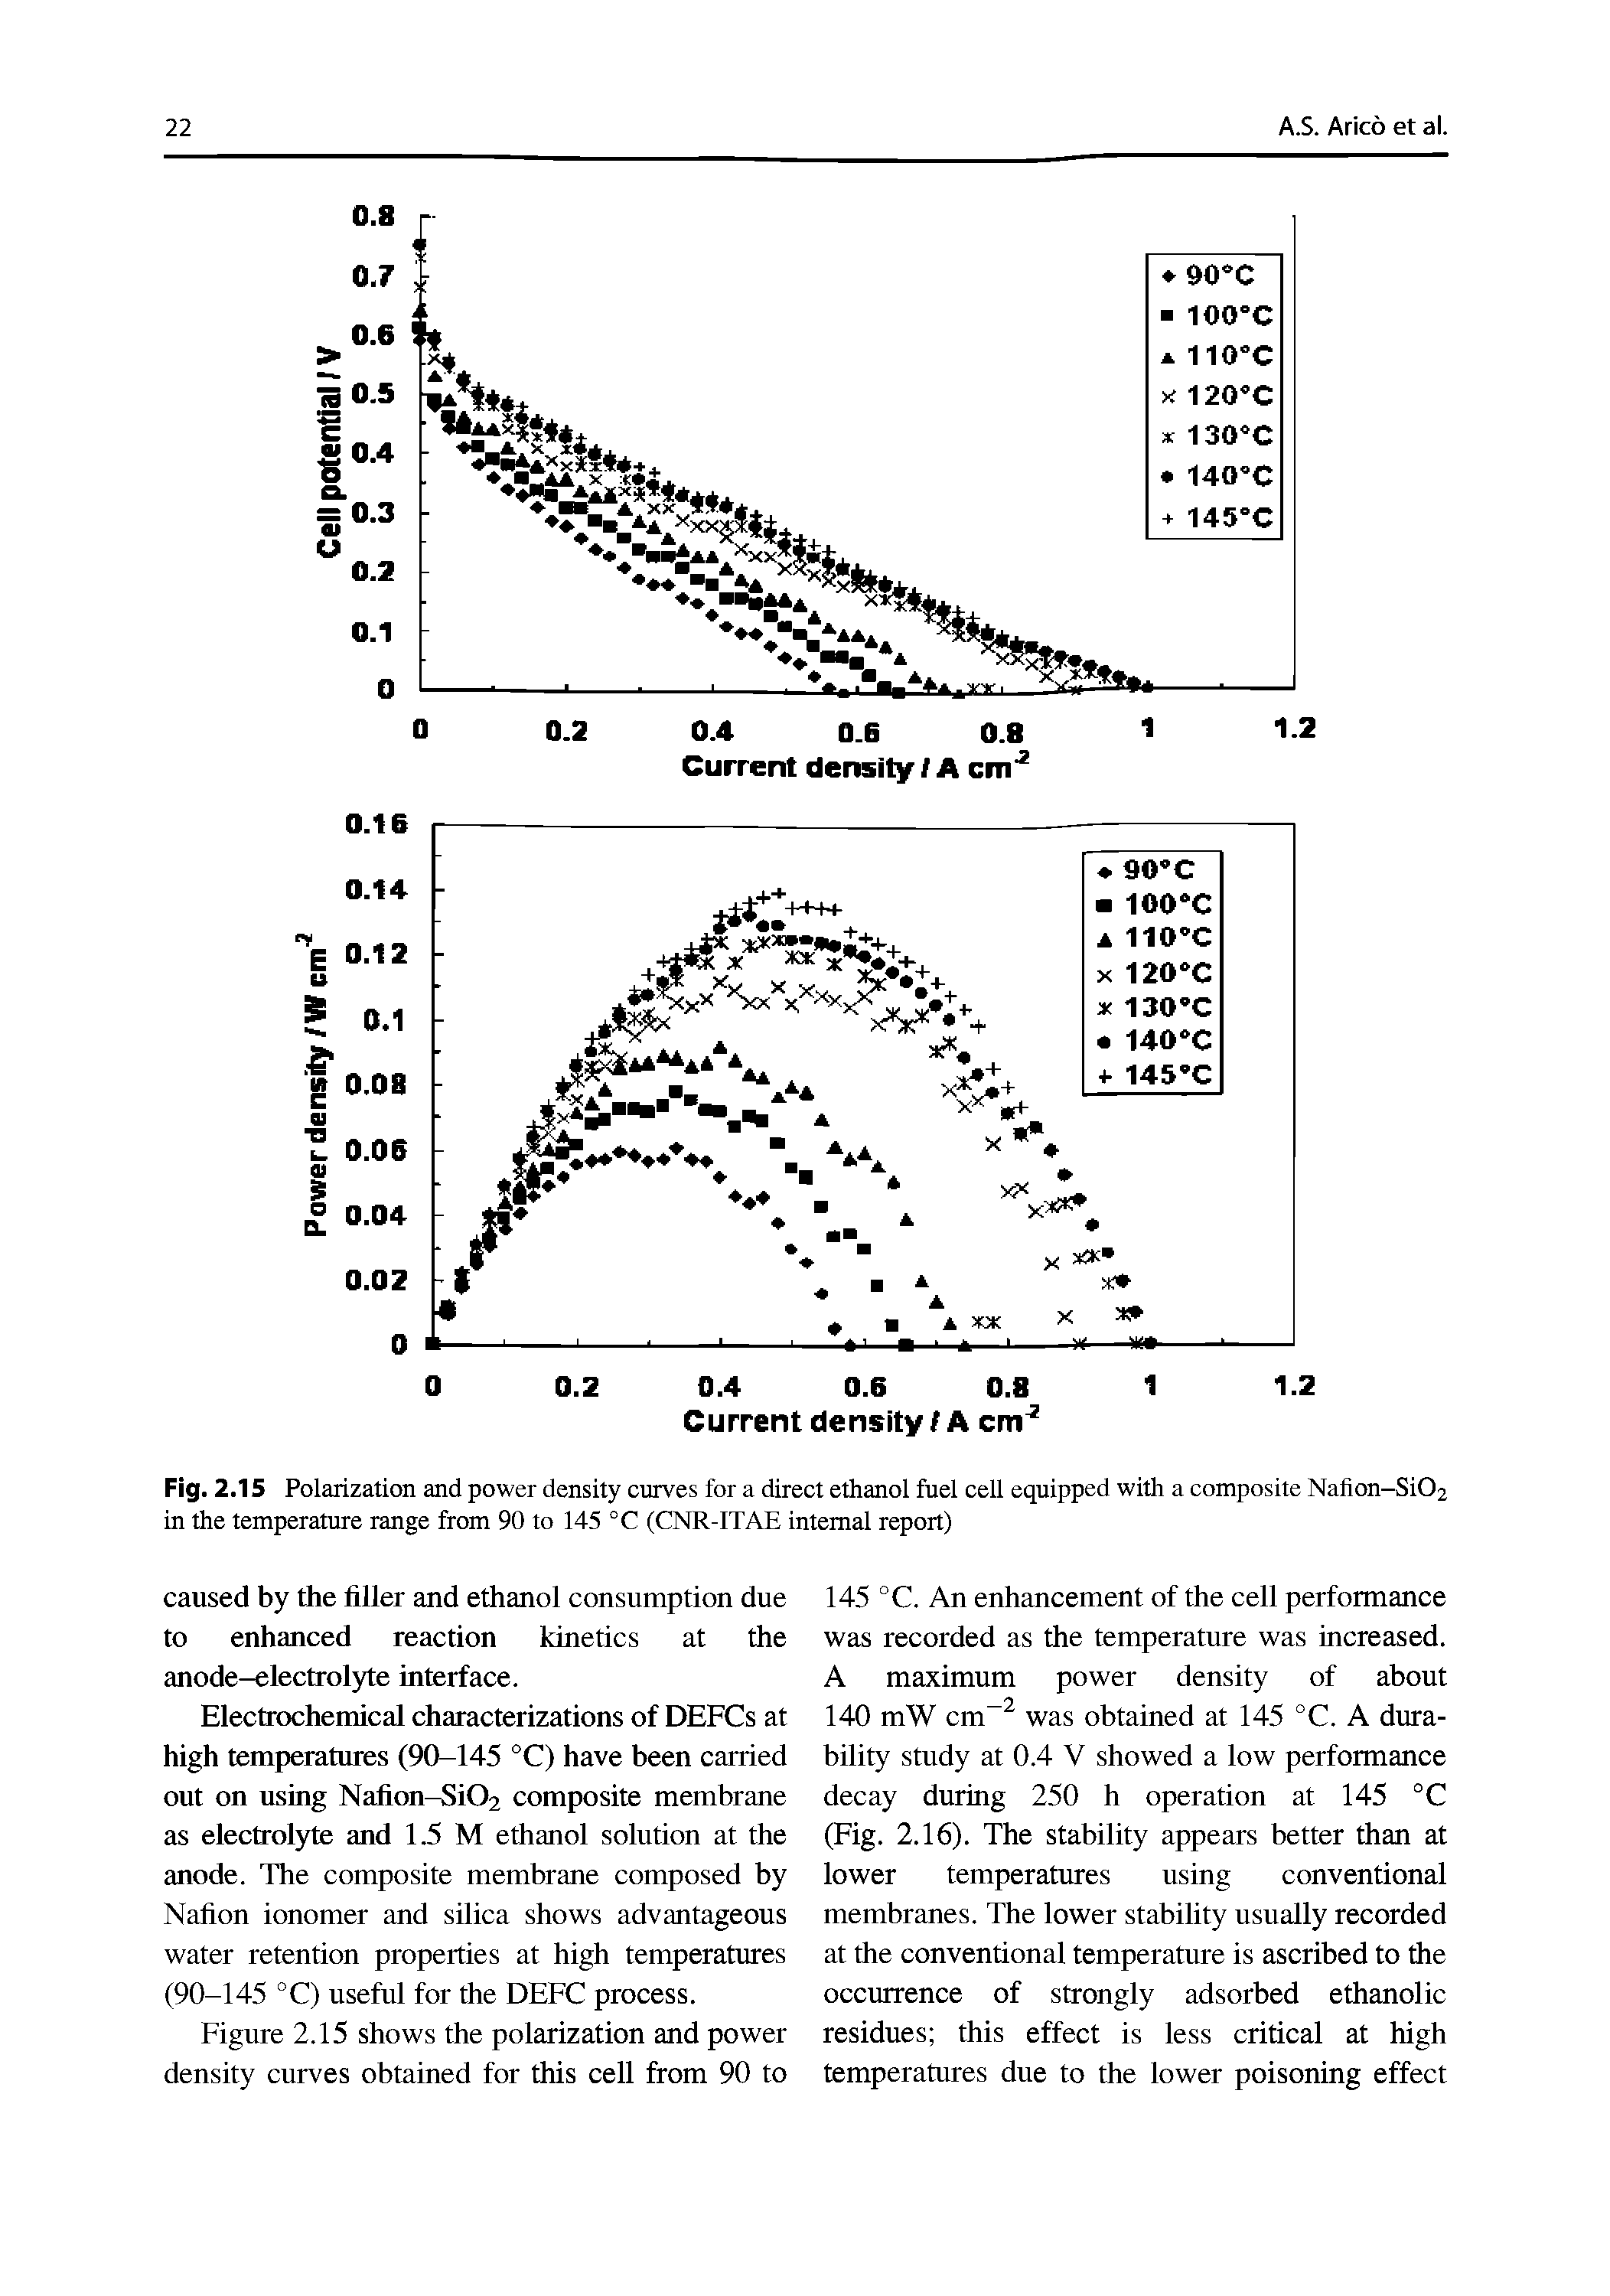 Fig. 2.15 Polarization and power density curves for a direct ethanol fuel cell equipped with a composite Nafion-Si02 in the temperature range from 90 to 145 °C (CNR-ITAE internal report)...